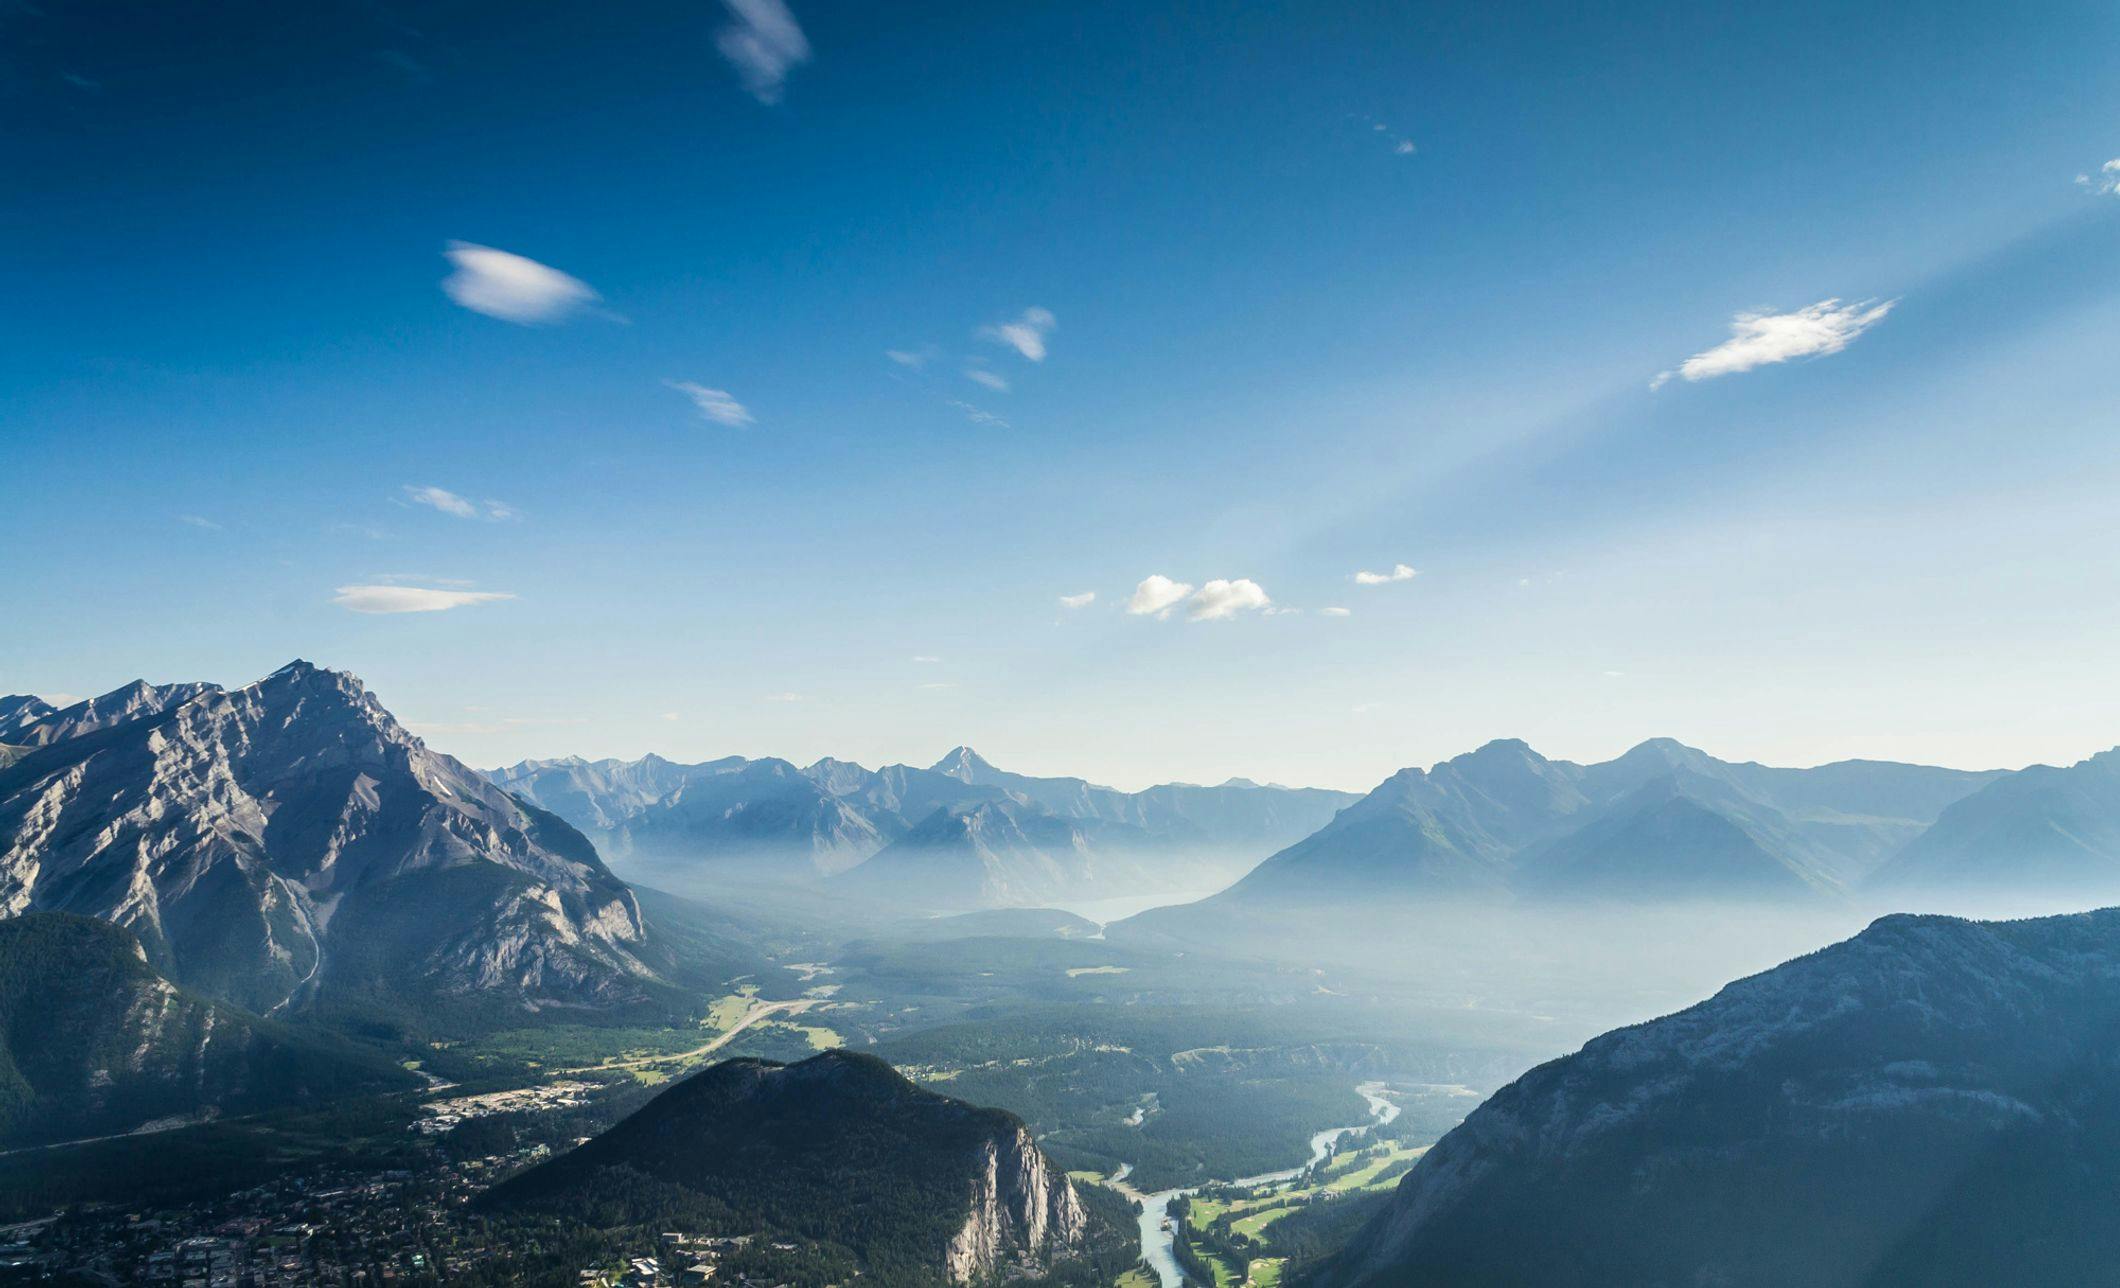 Banff seen from above in a summers haze